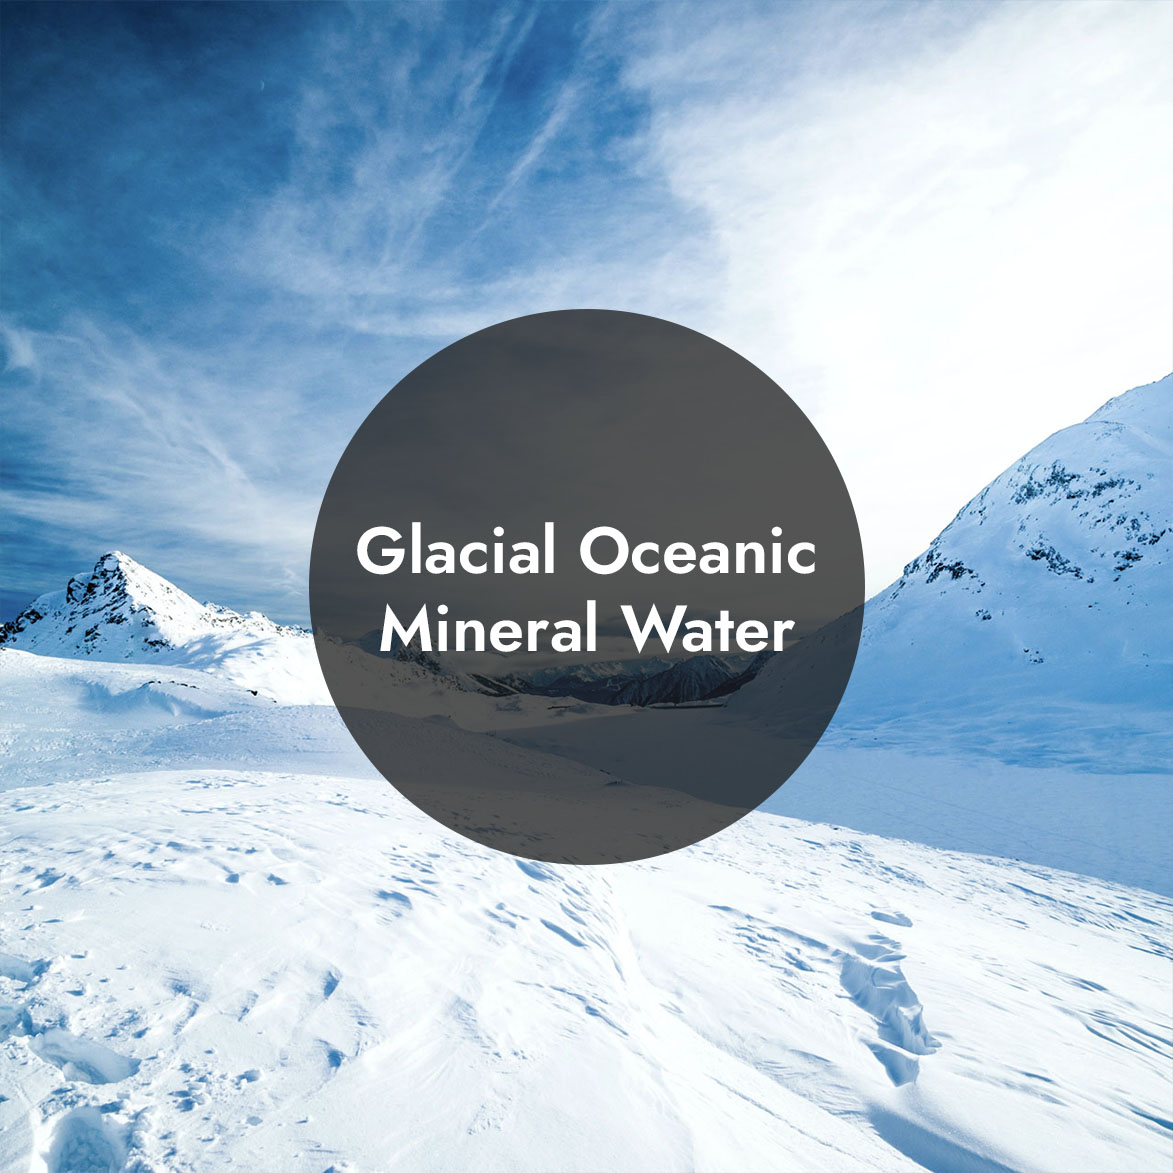 Glacial Oceanic Mineral Water